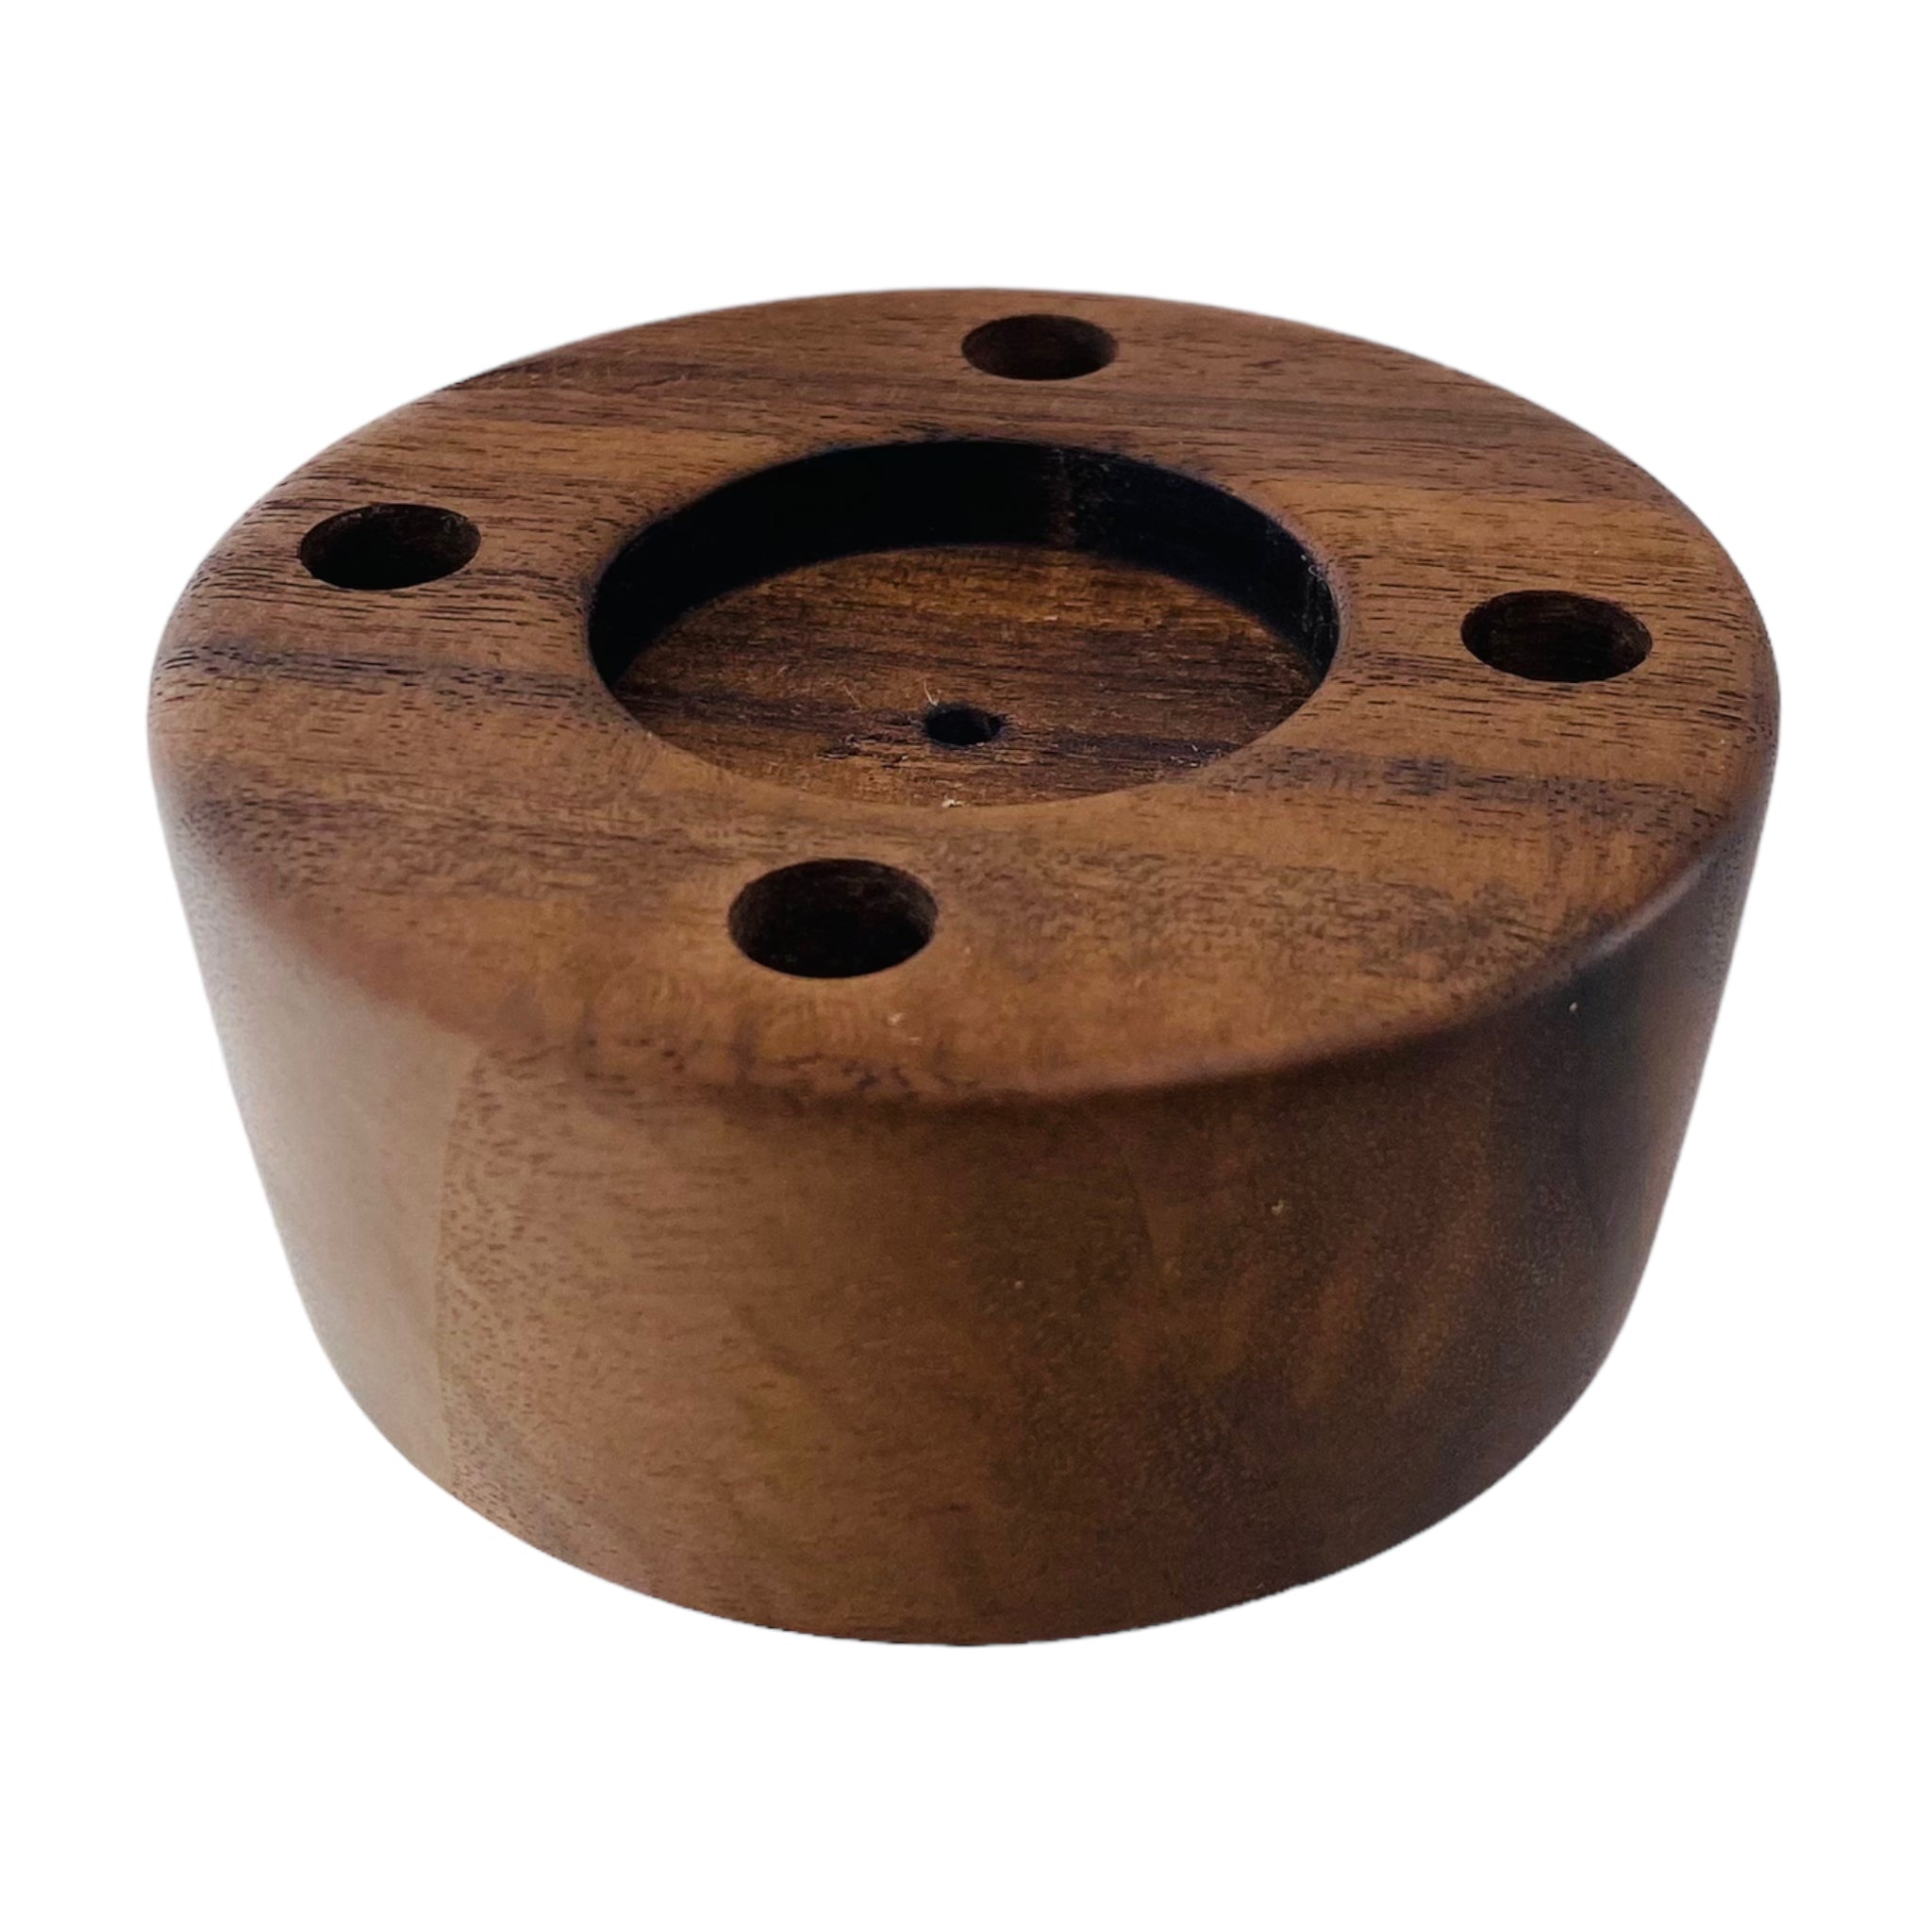 Round 4 Hole Wood Display Stand Holder For 10mm Bong Bowl Pieces Or Quartz Bangers - Black Walnut